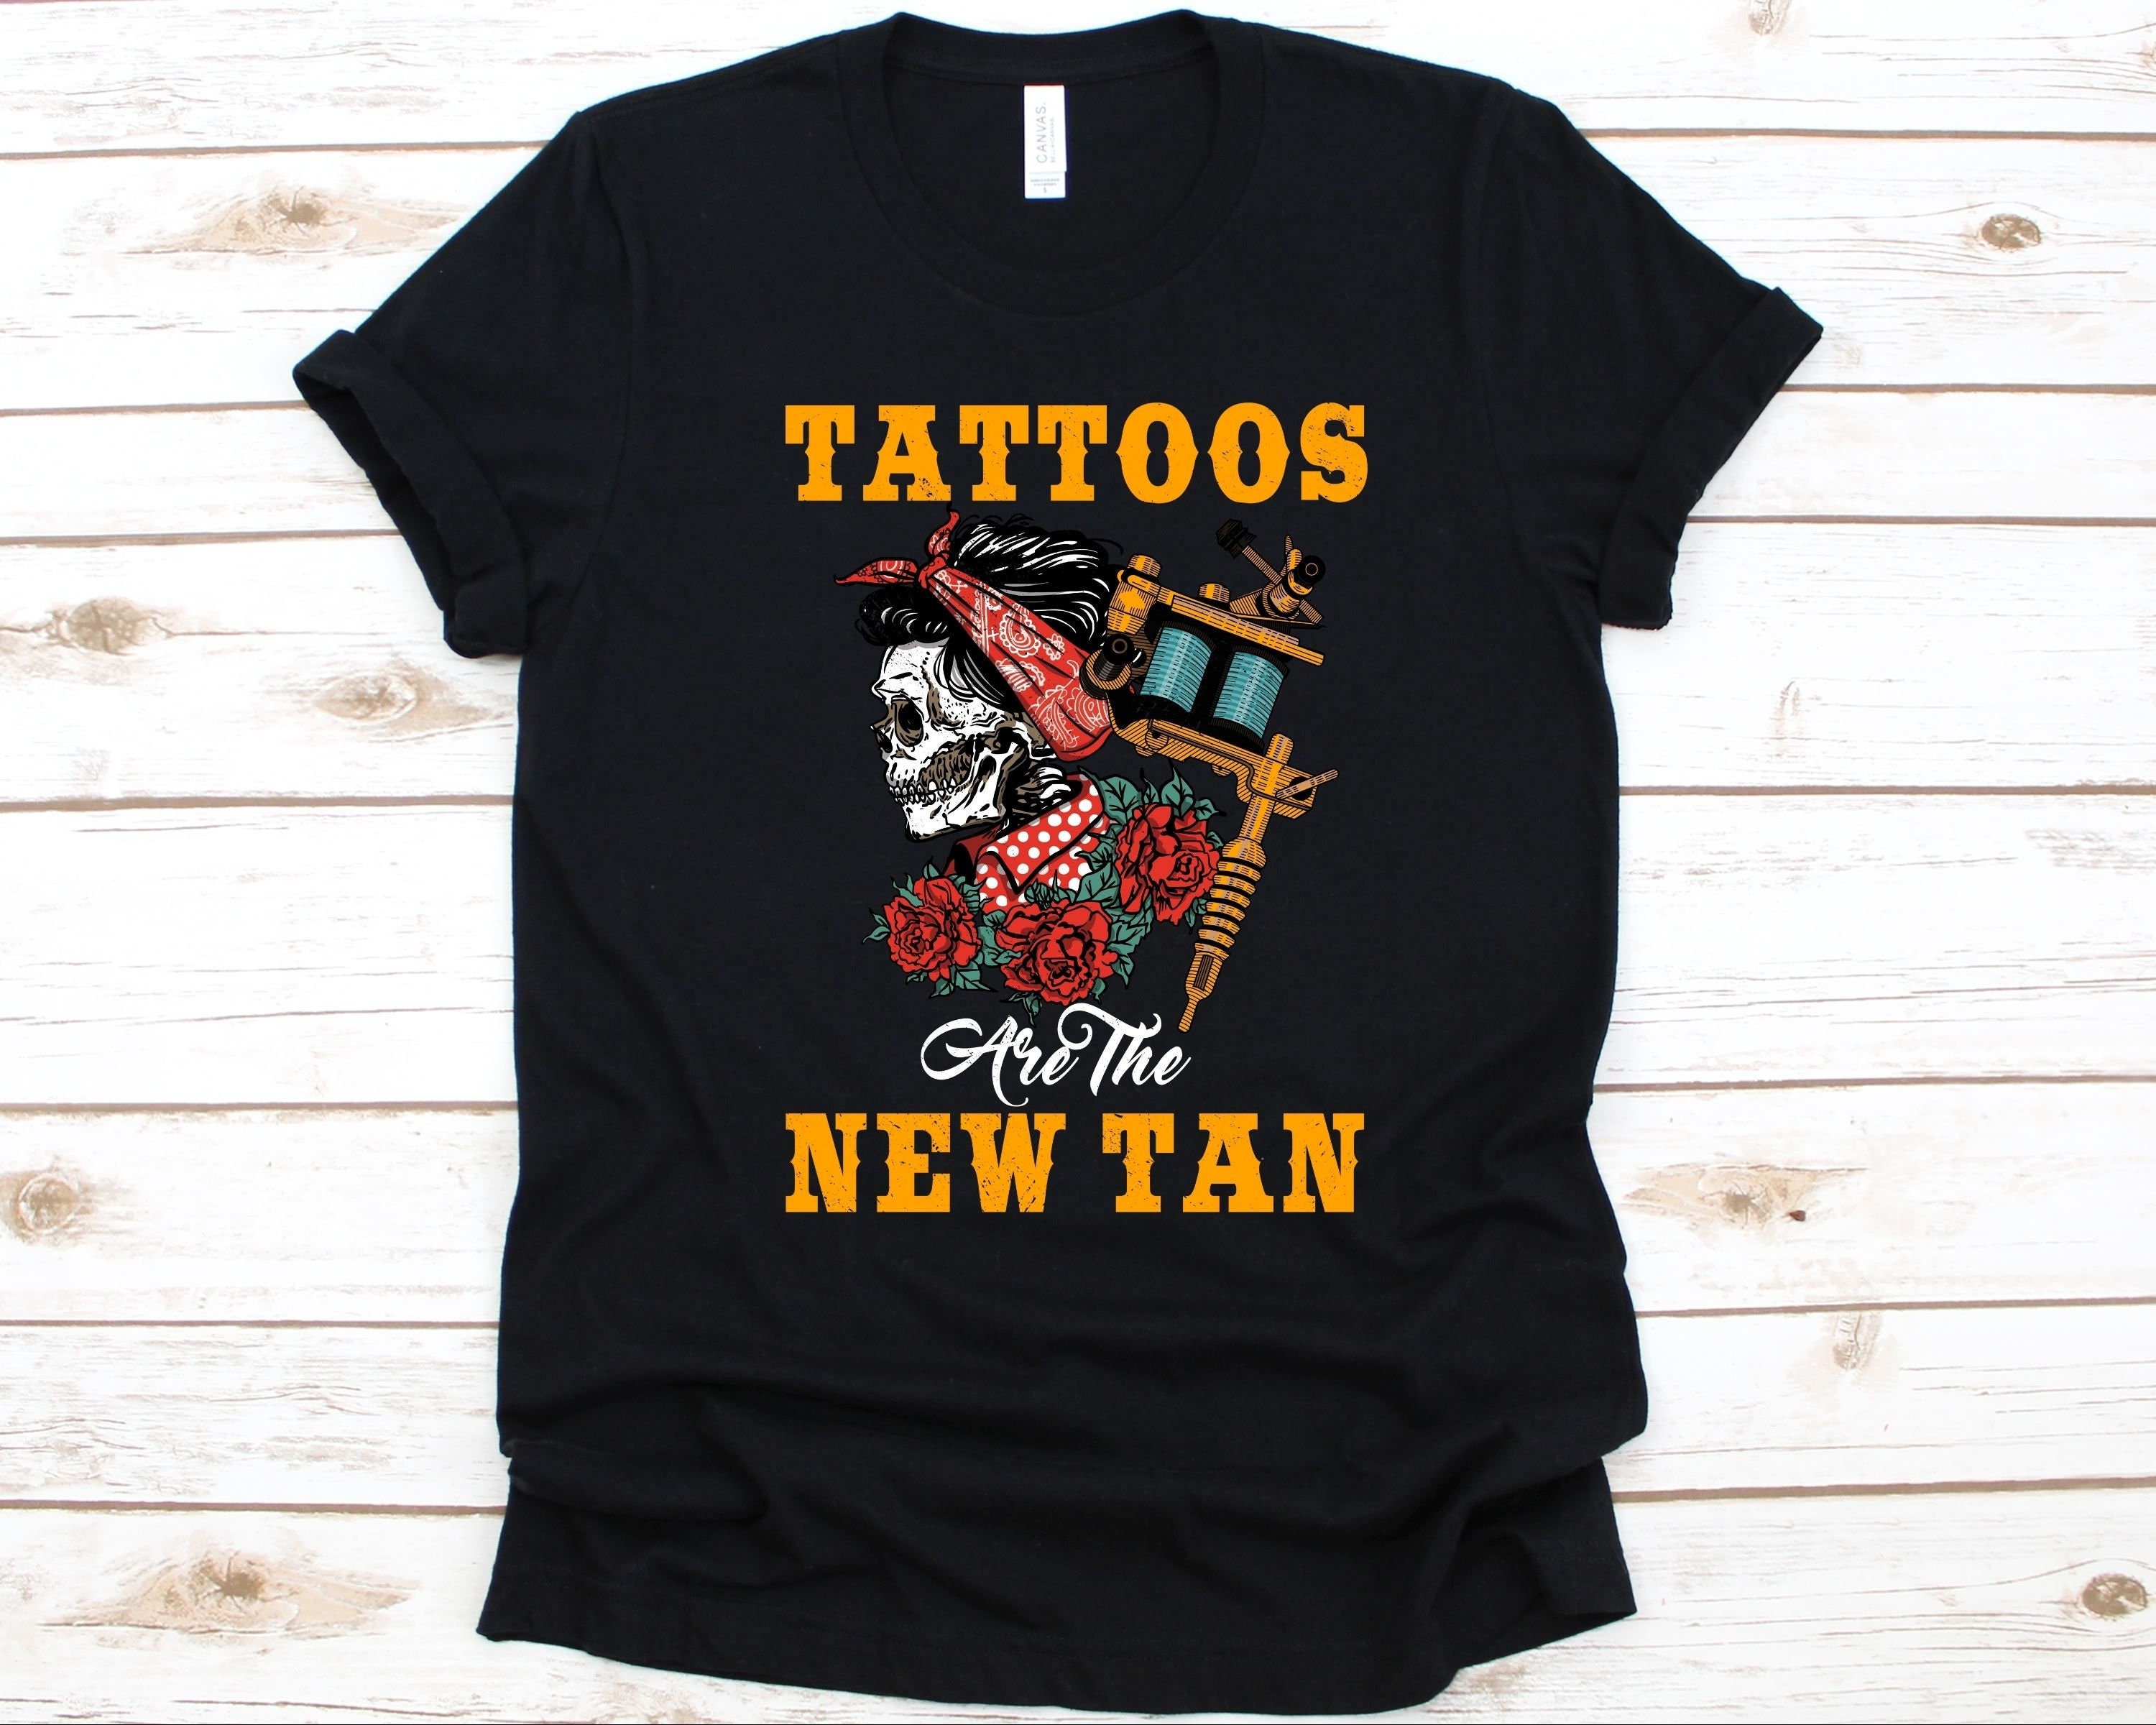 Limited edition | Tattoo inspired clothing | Friends tshirt, Clothes, Shirt  design inspiration